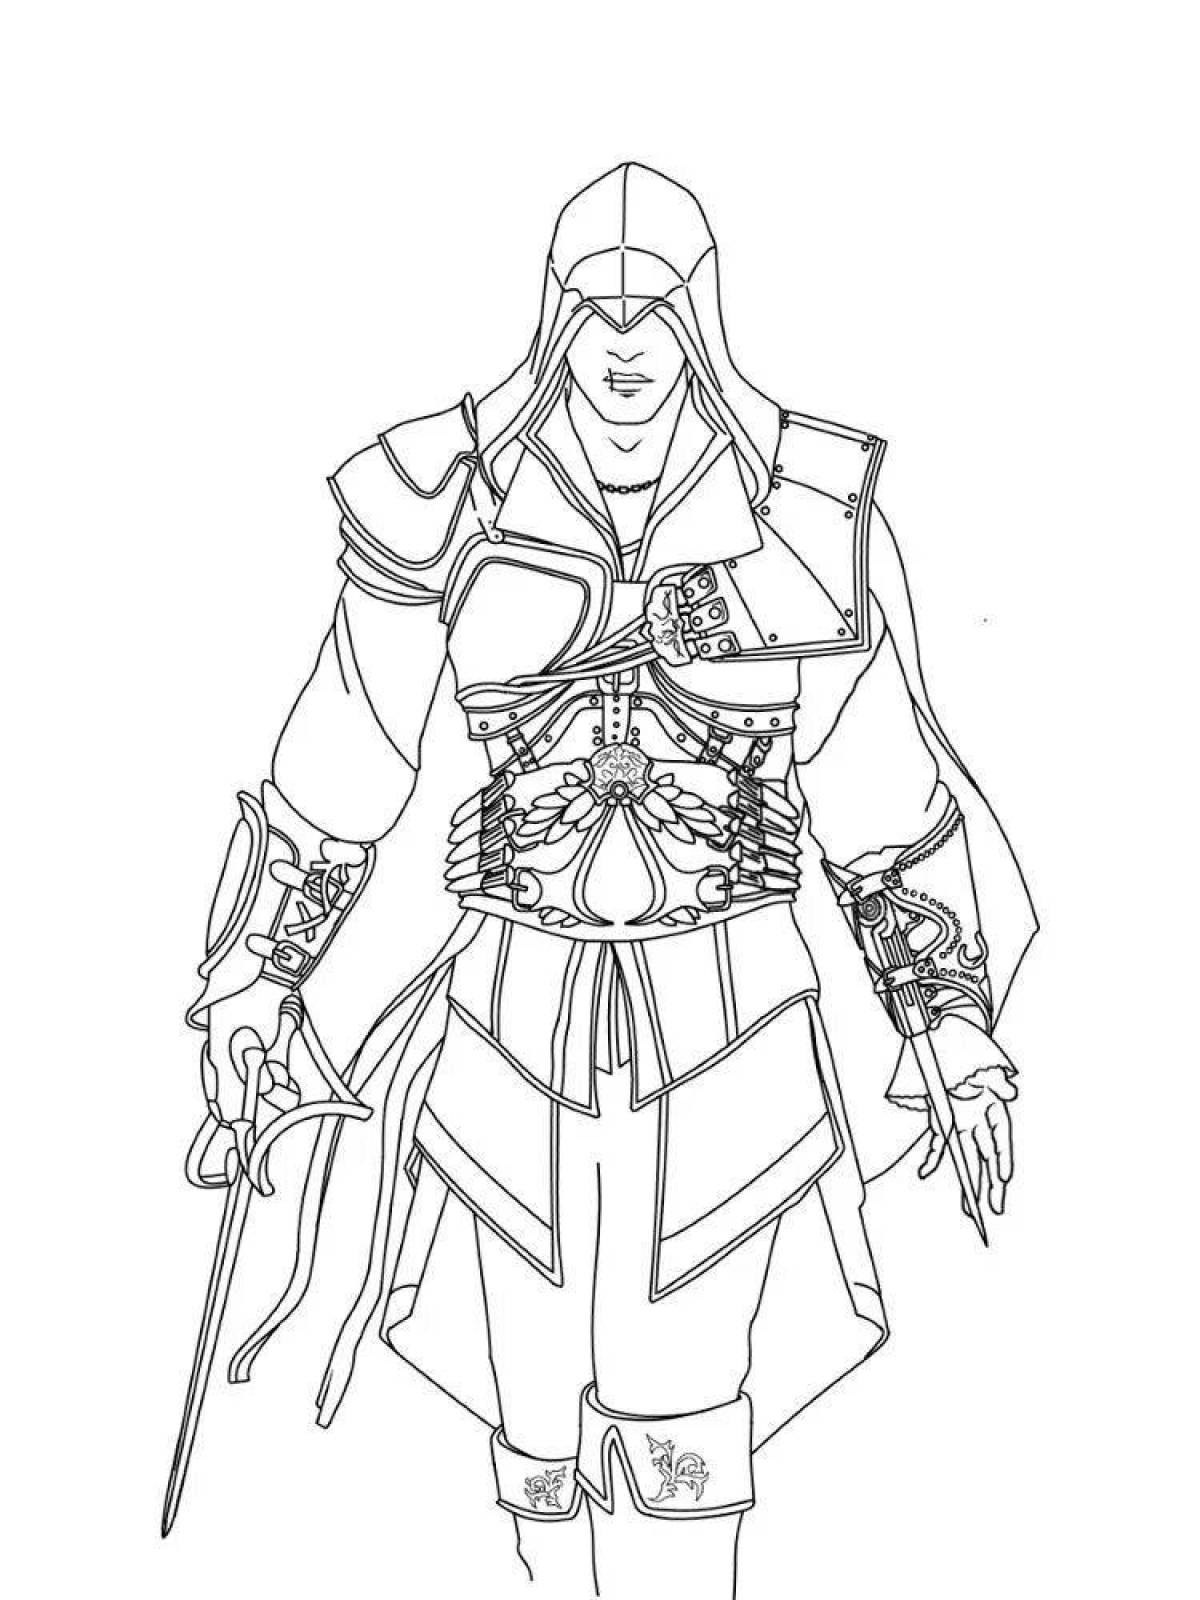 Colorful assassin's creed coloring page